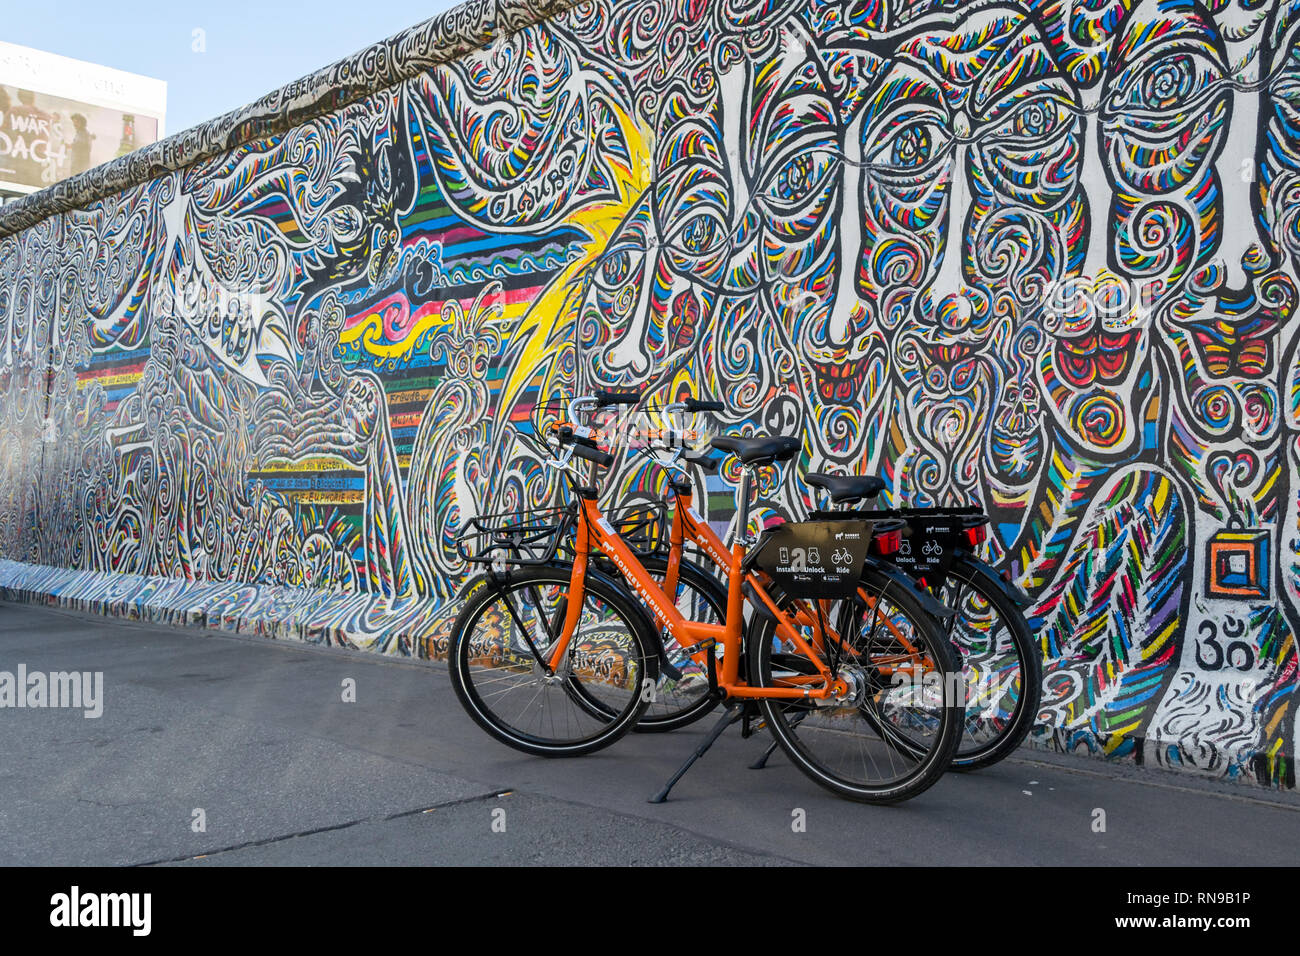 Berlin / Germany - 30 June 2018: Orange dock-less bikes for hire at East Side Gallery, a 1316 m long remnant of the Berlin Wall painted with graffiti  Stock Photo